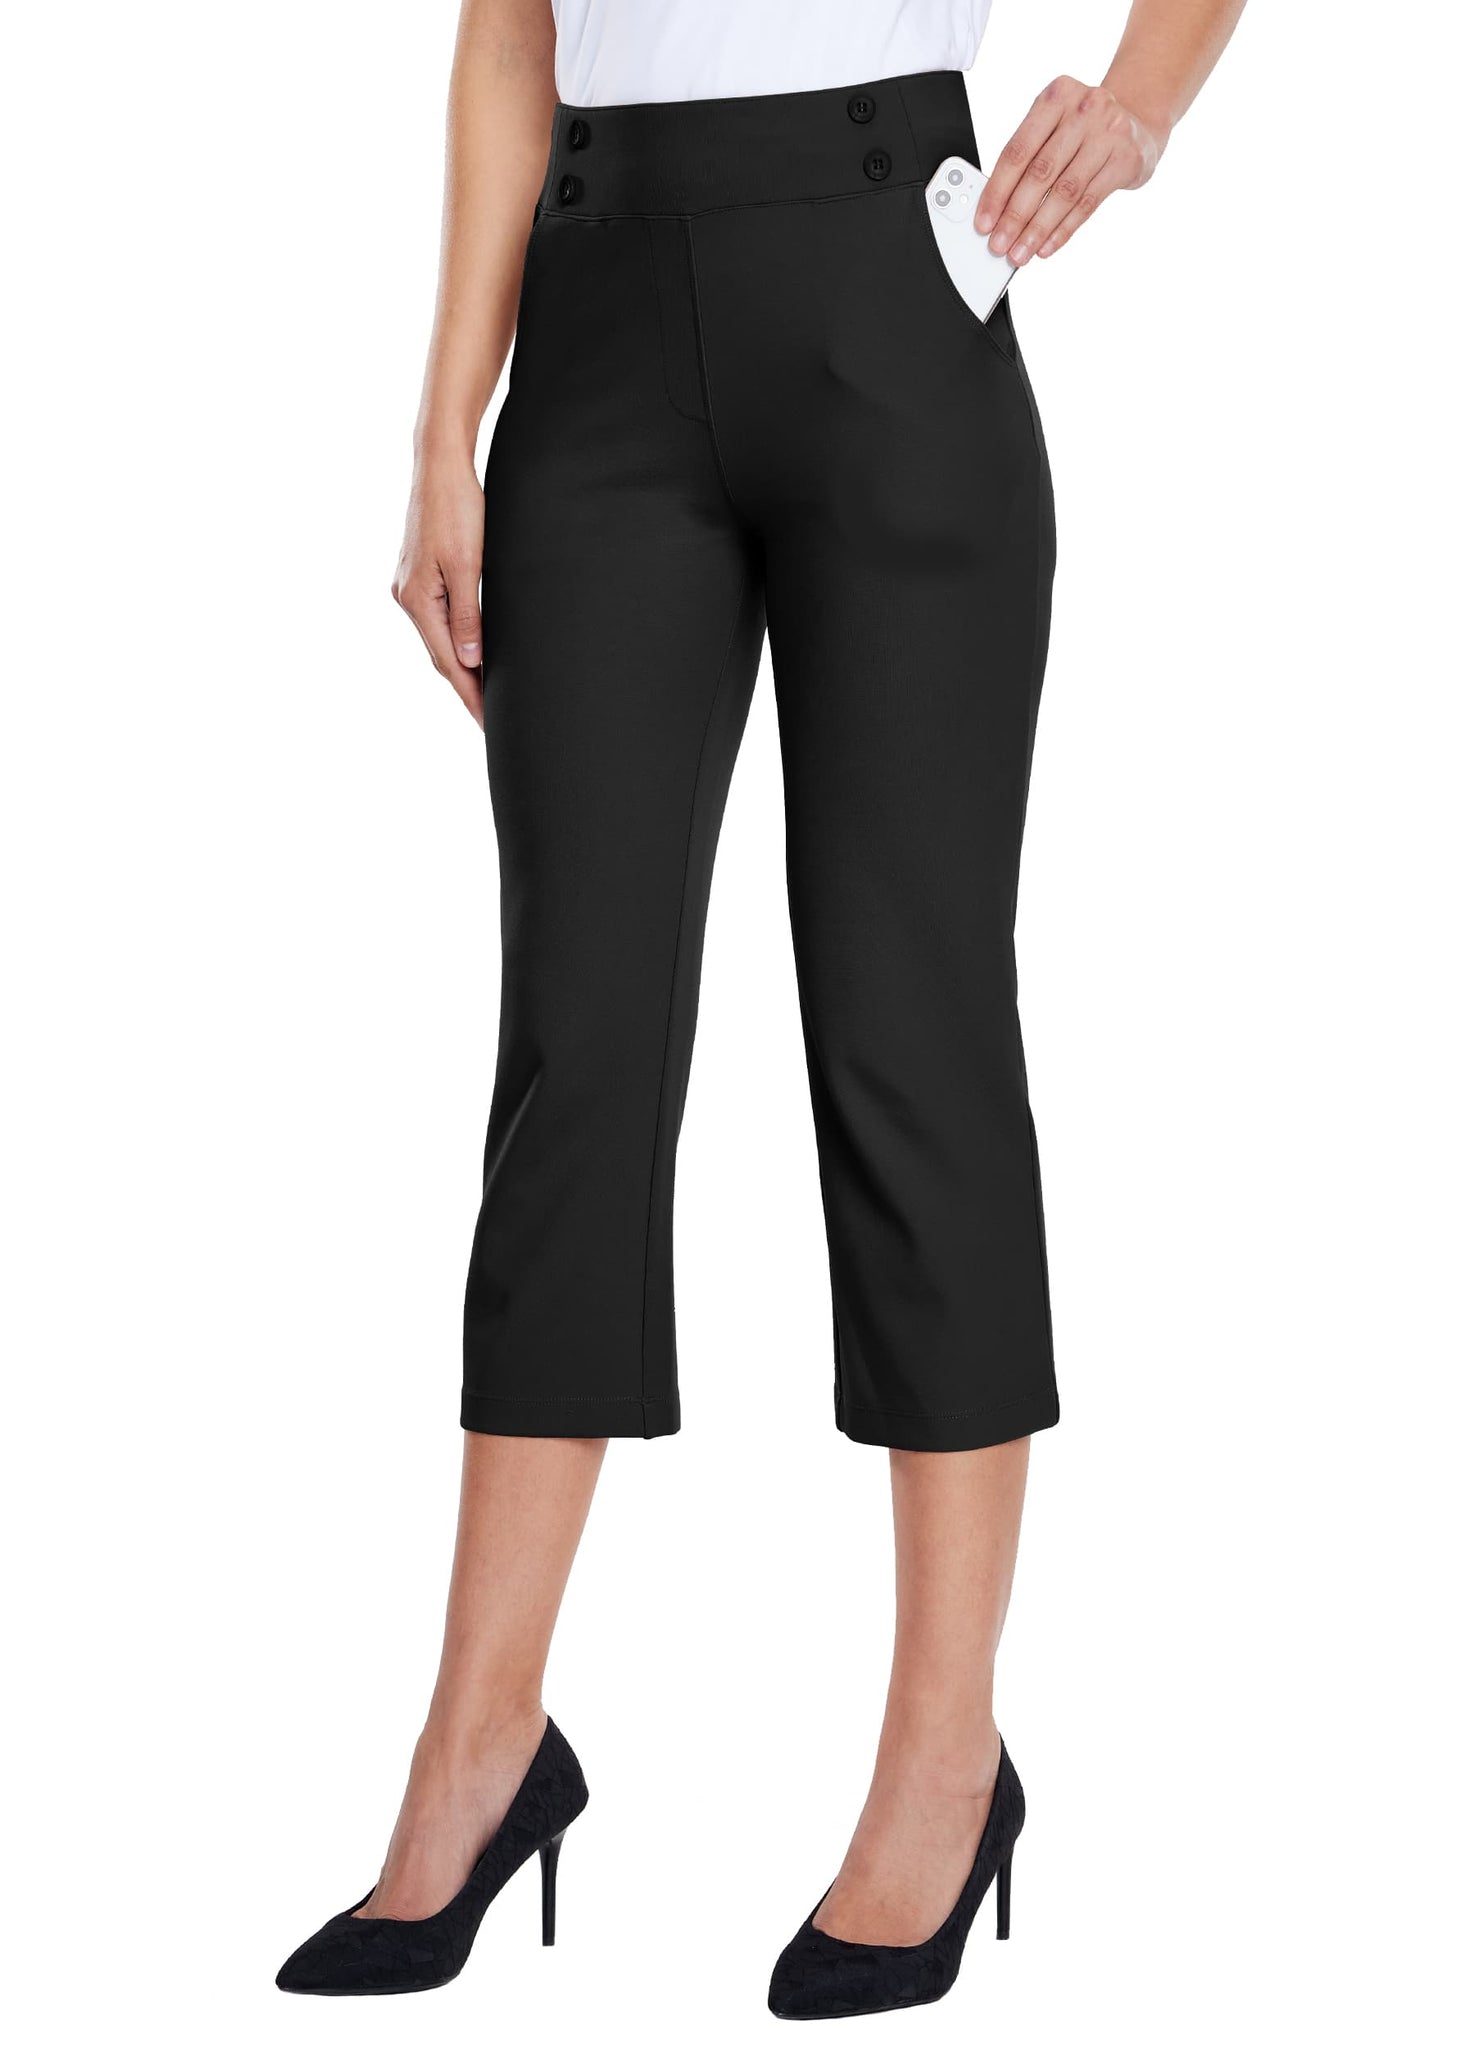 Women's Button Pull On Capris